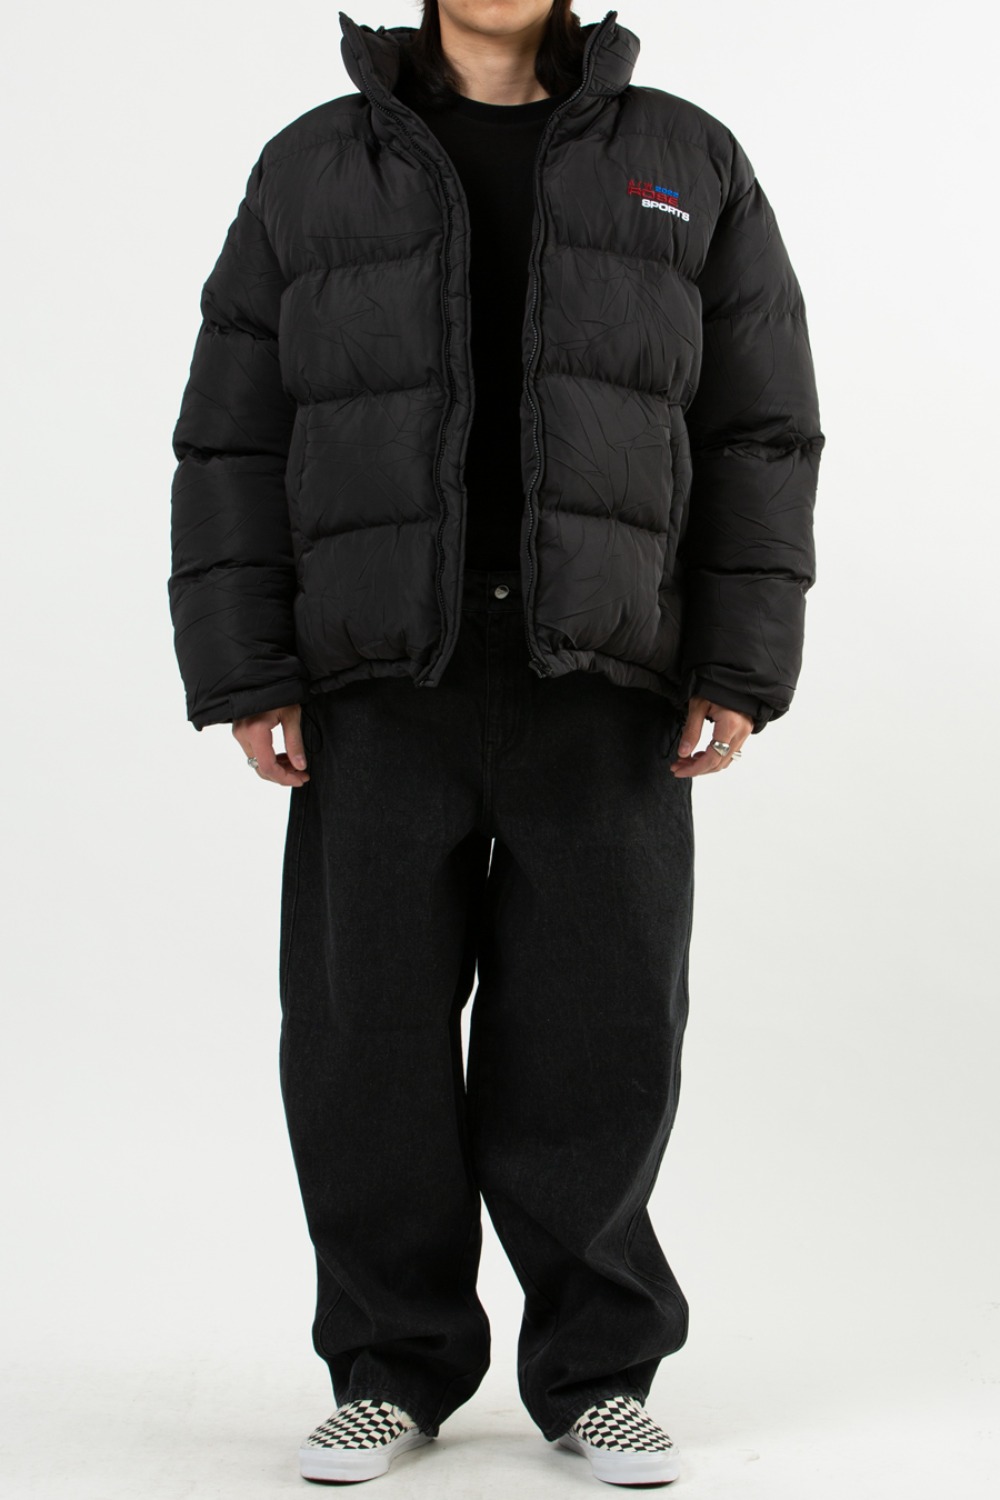 WOVEN CRUSHED PUFFER JACKET BLACK